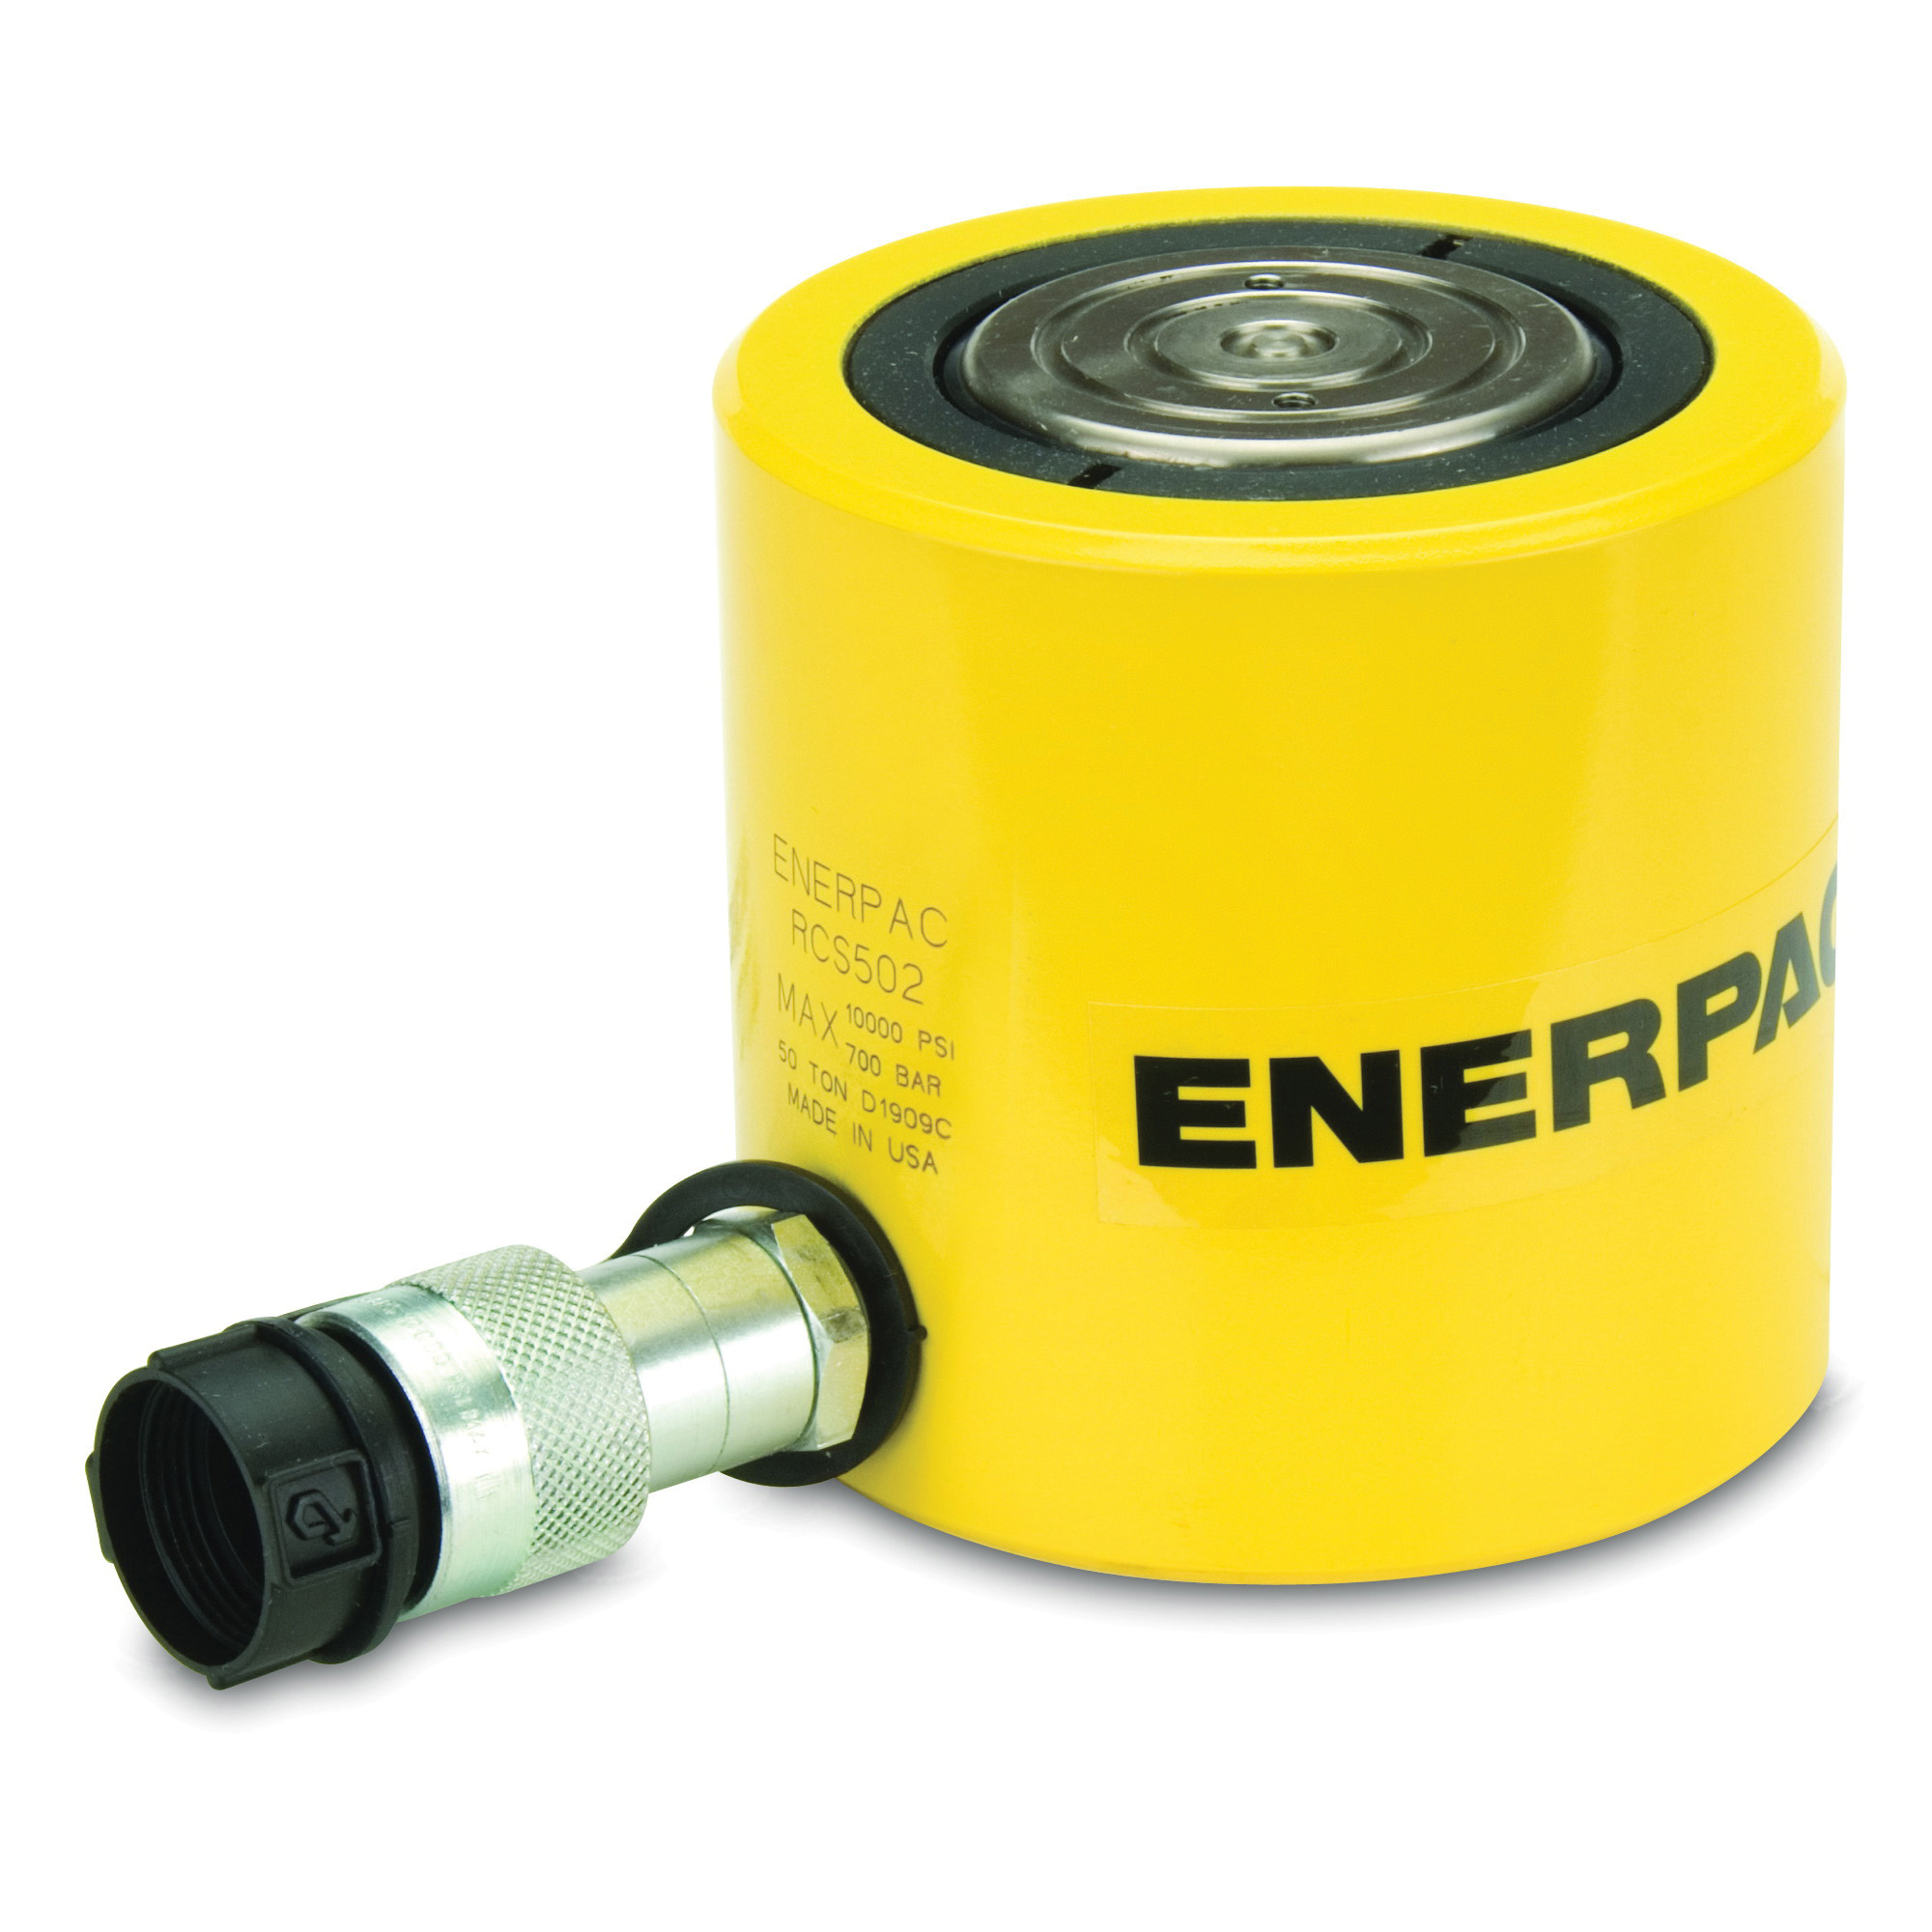 Enerpac® Flat-Jac® RCS-201 Low Height Single Acting Spring Return Hydraulic Cylinder, 20 ton Capacity, 2.38 in Dia Bore, 1-3/4 in L Stroke, 3.88 in H Retract, 2 in Dia Rod, 10000 psi